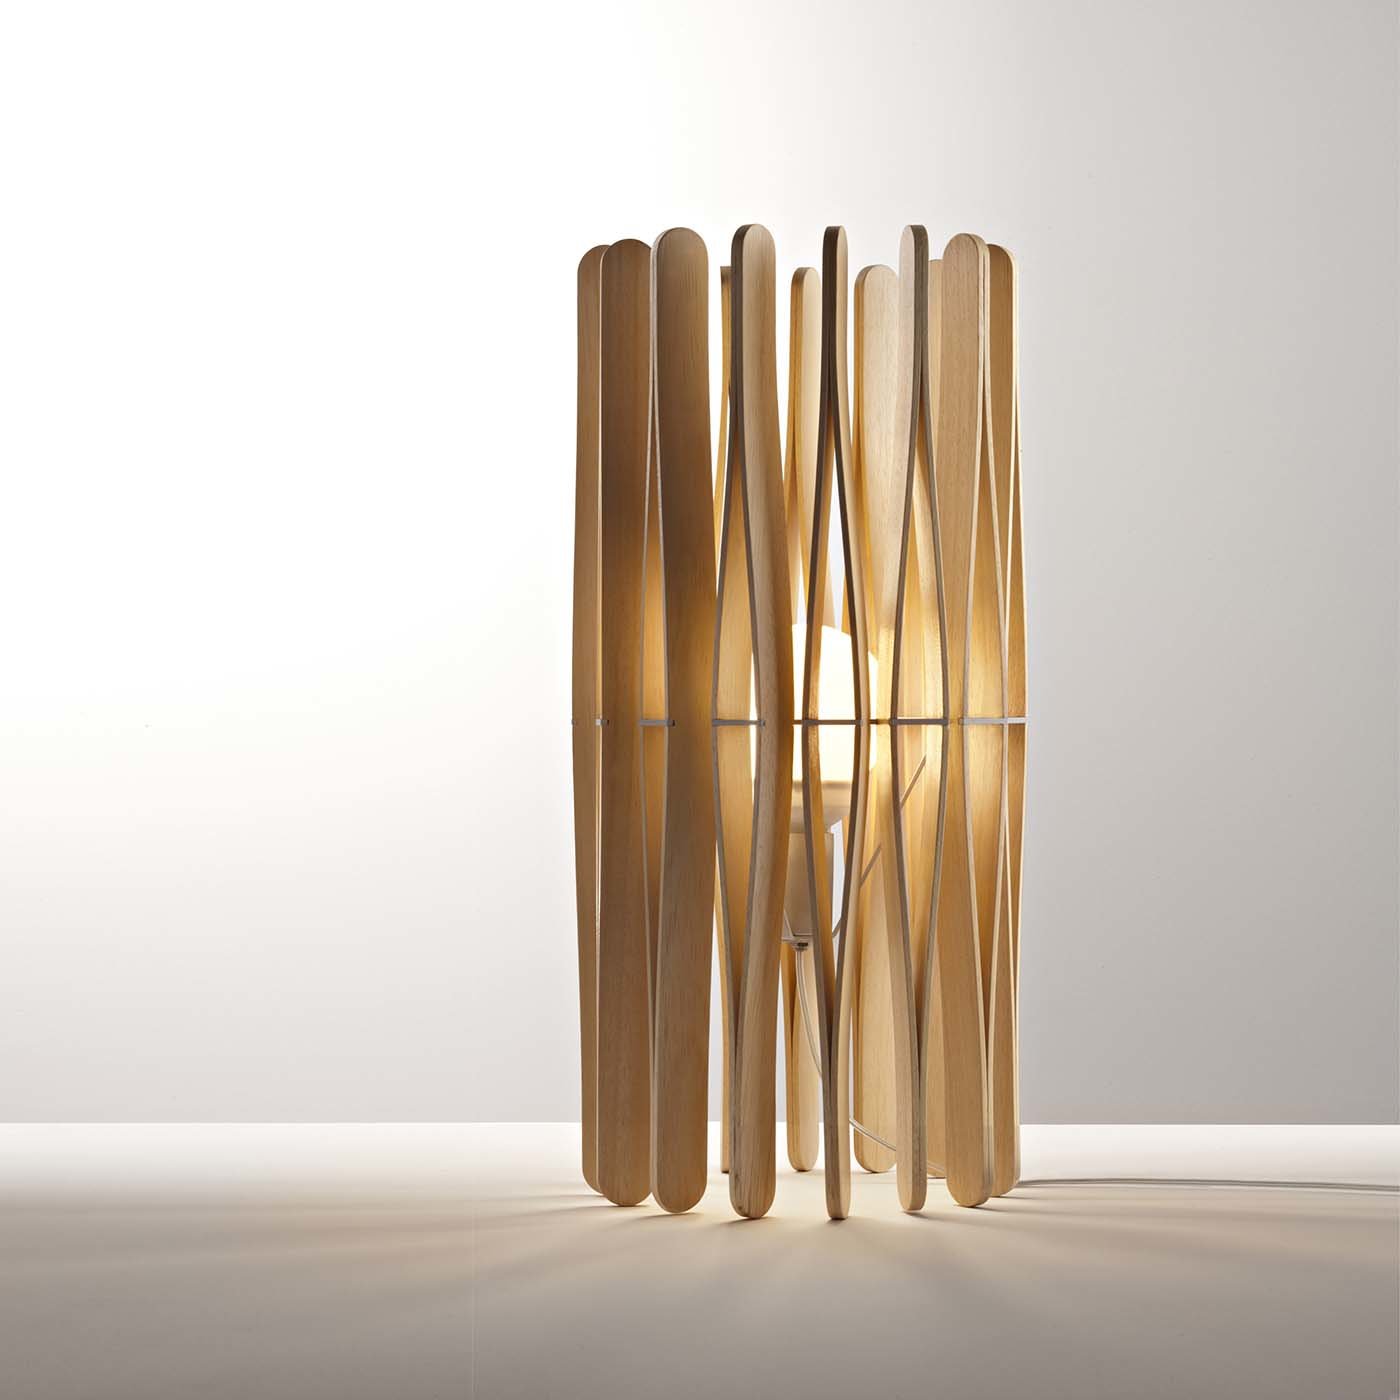 Stick Table Lamp by Matali Crasset - Alternative view 1